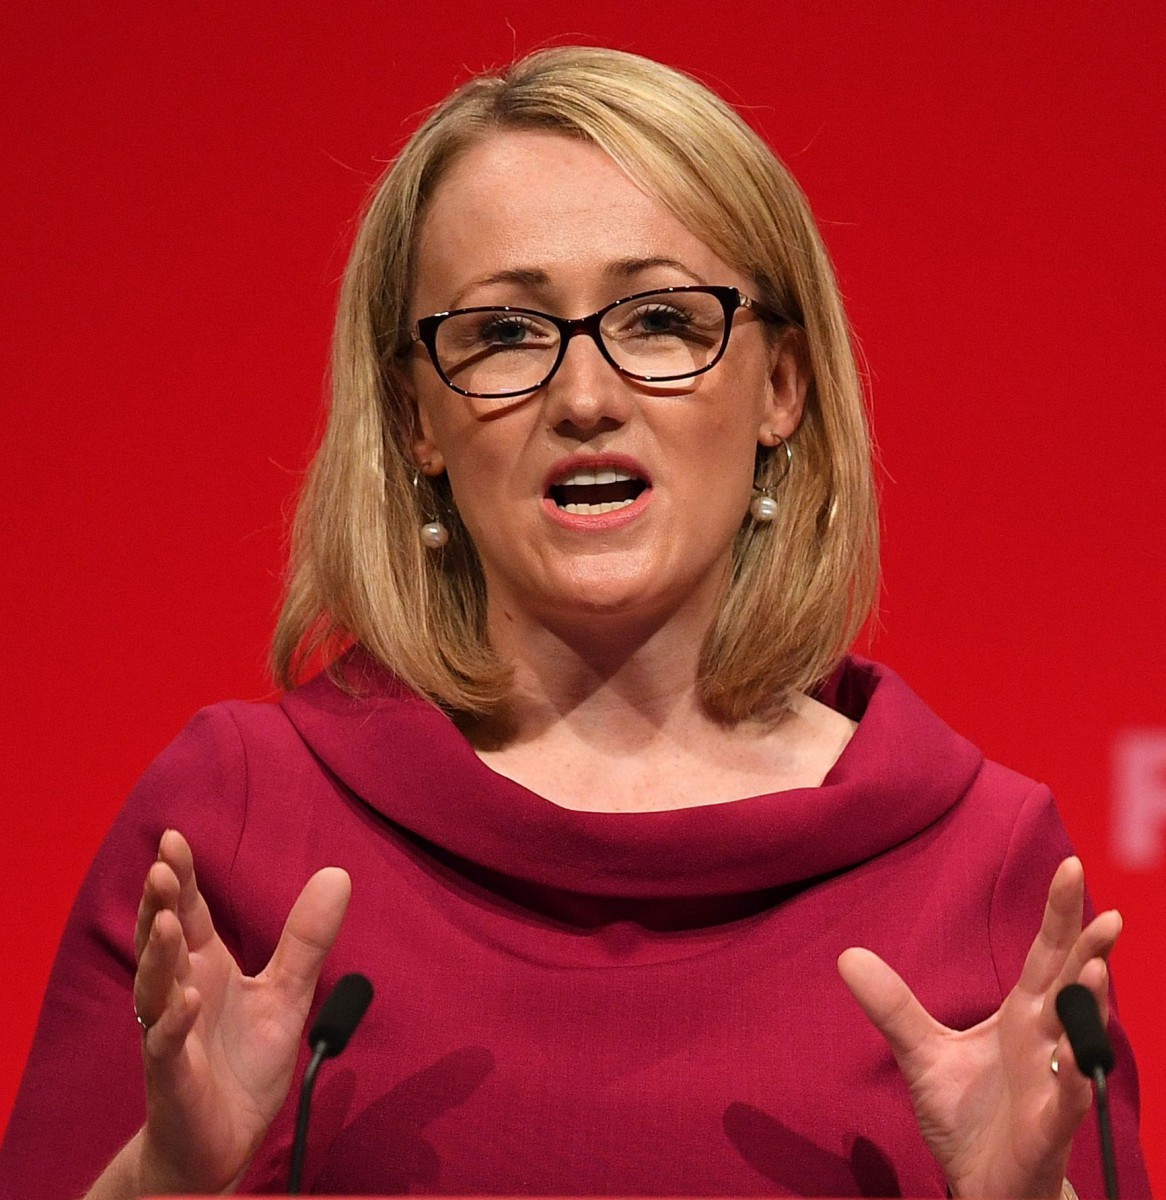 Rebecca Long-Bailey is one of the figures touted for the pro-Leave post